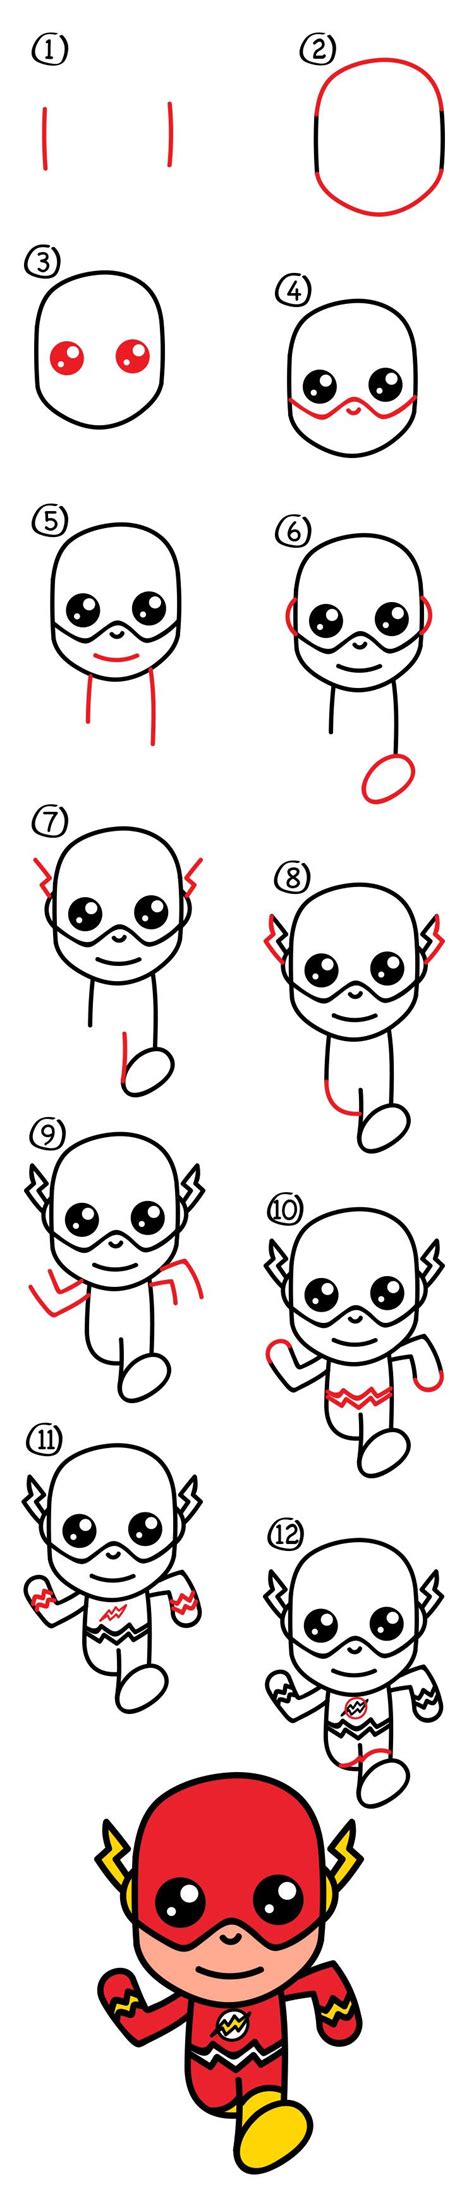 How To Draw The Flash Cartoon Art For Kids Hub The